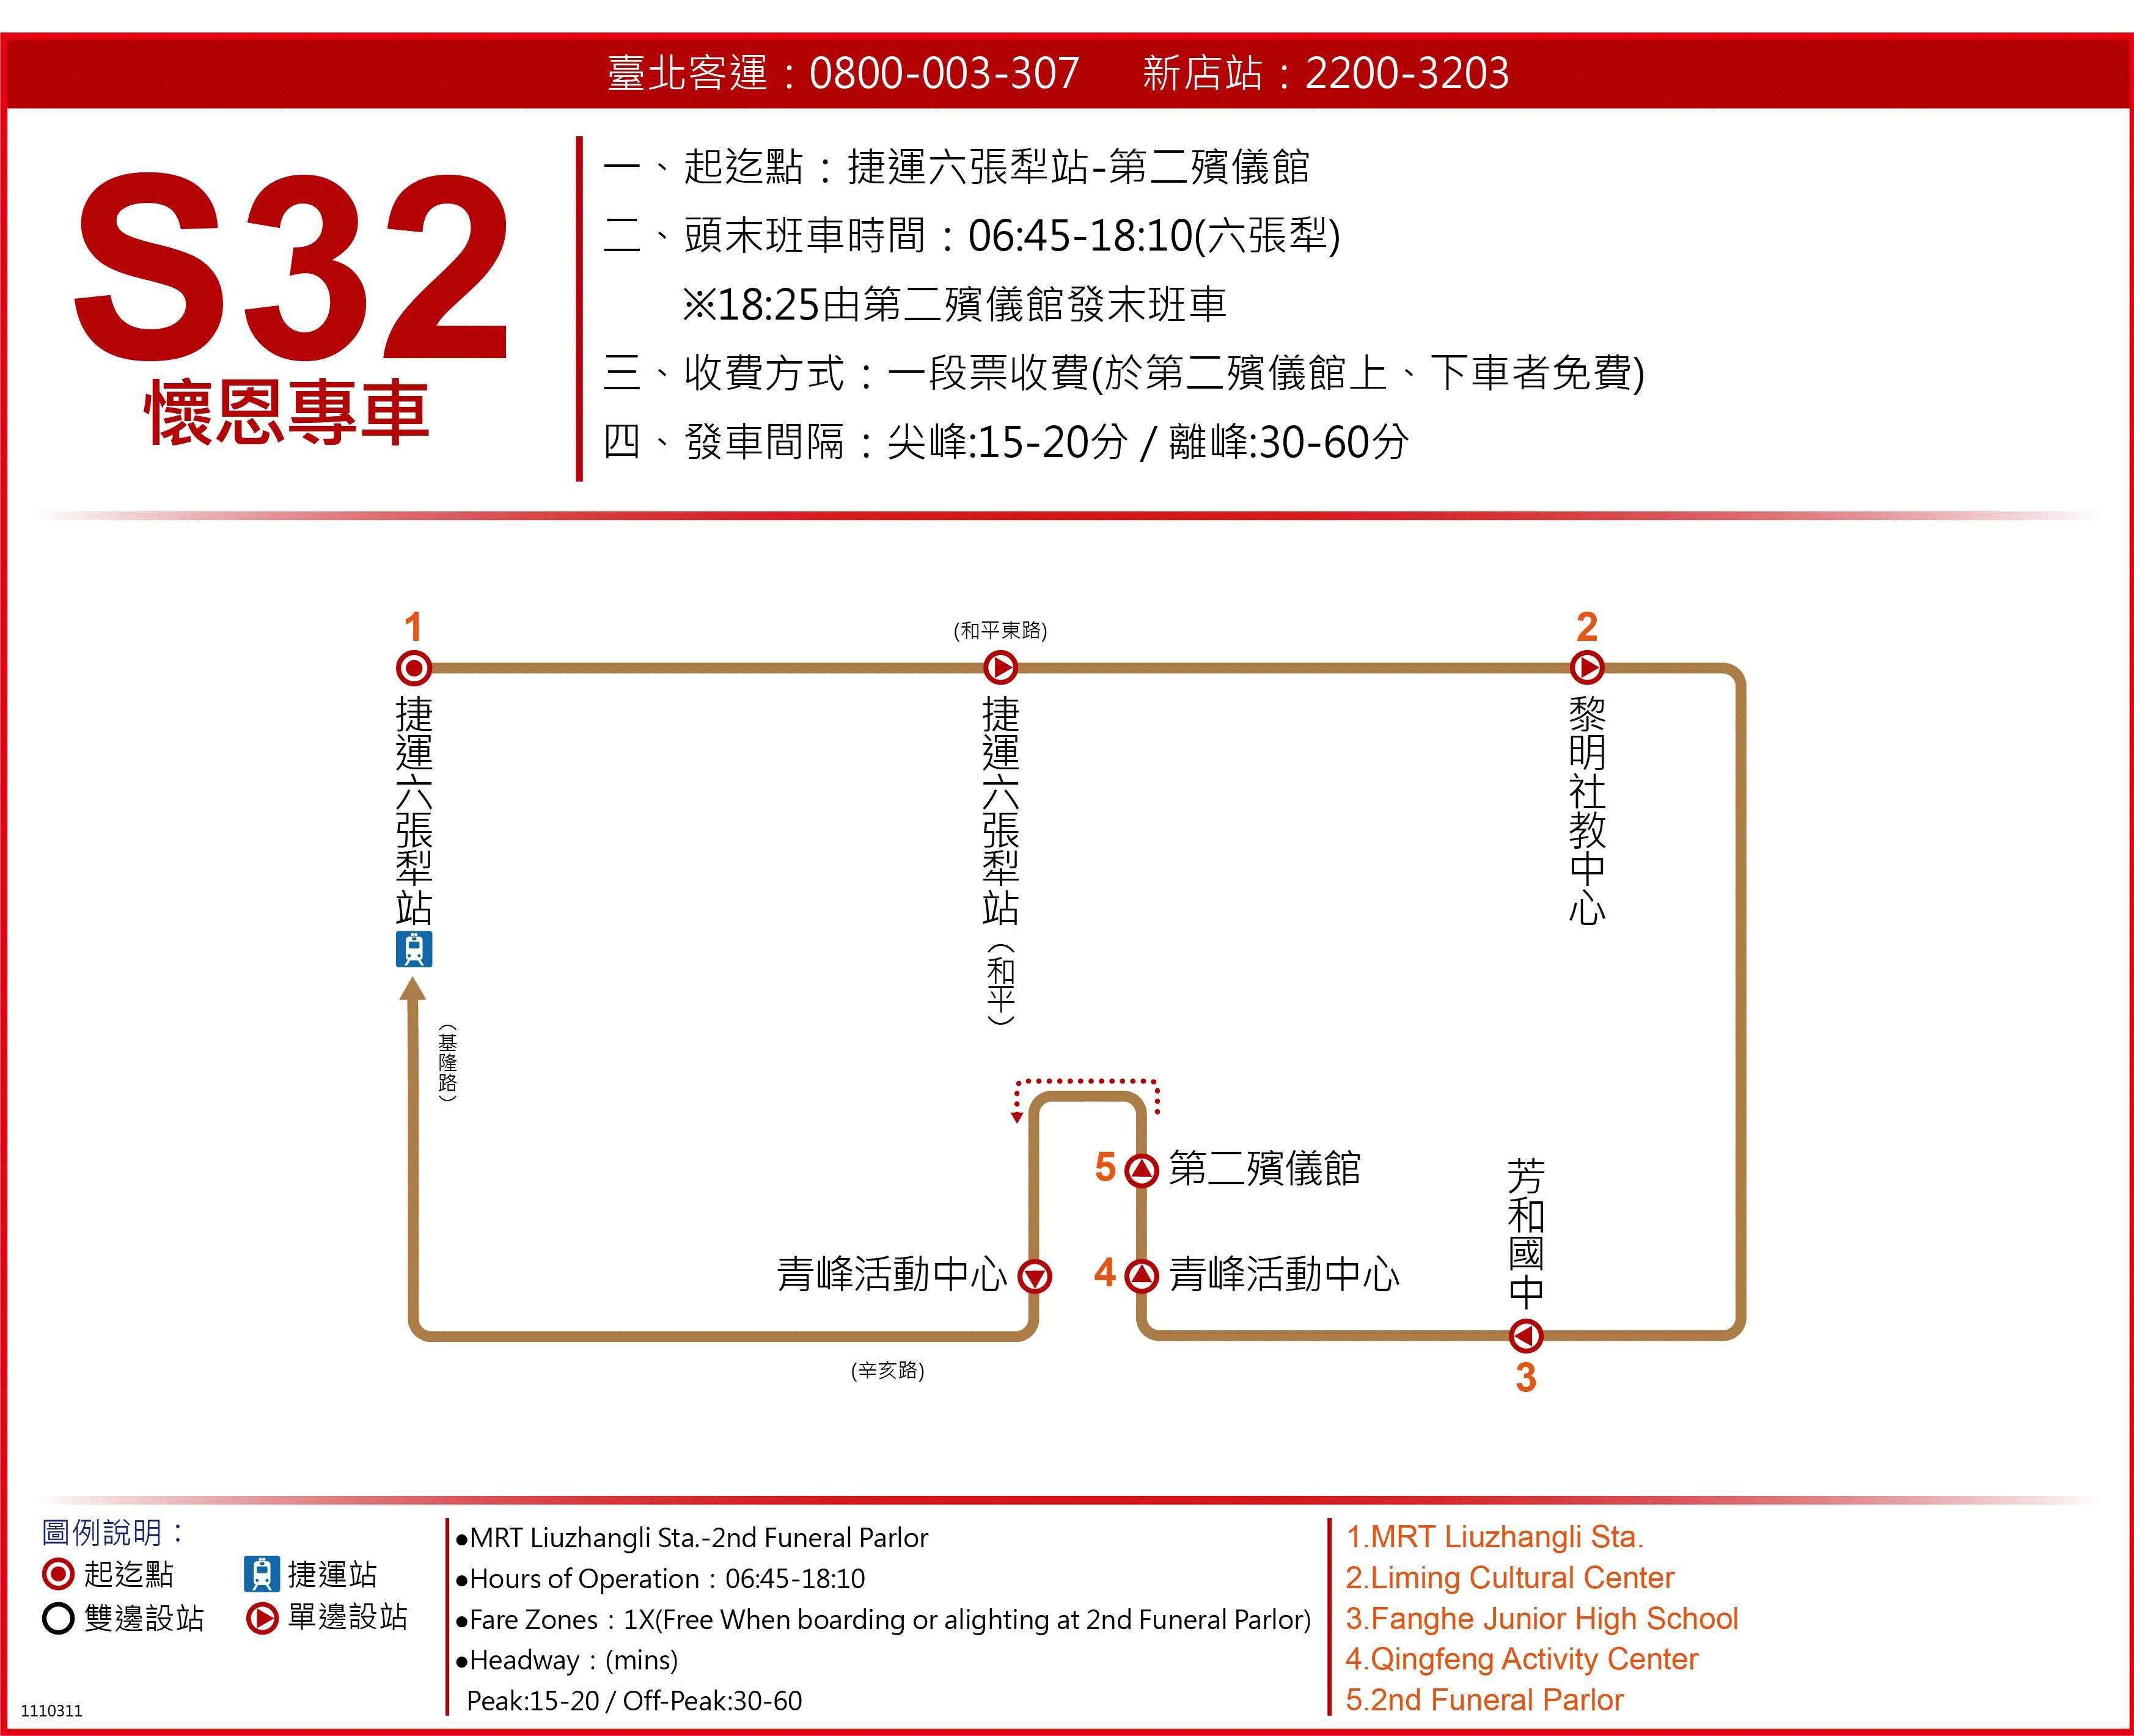 S32Route Map-台北市 Bus